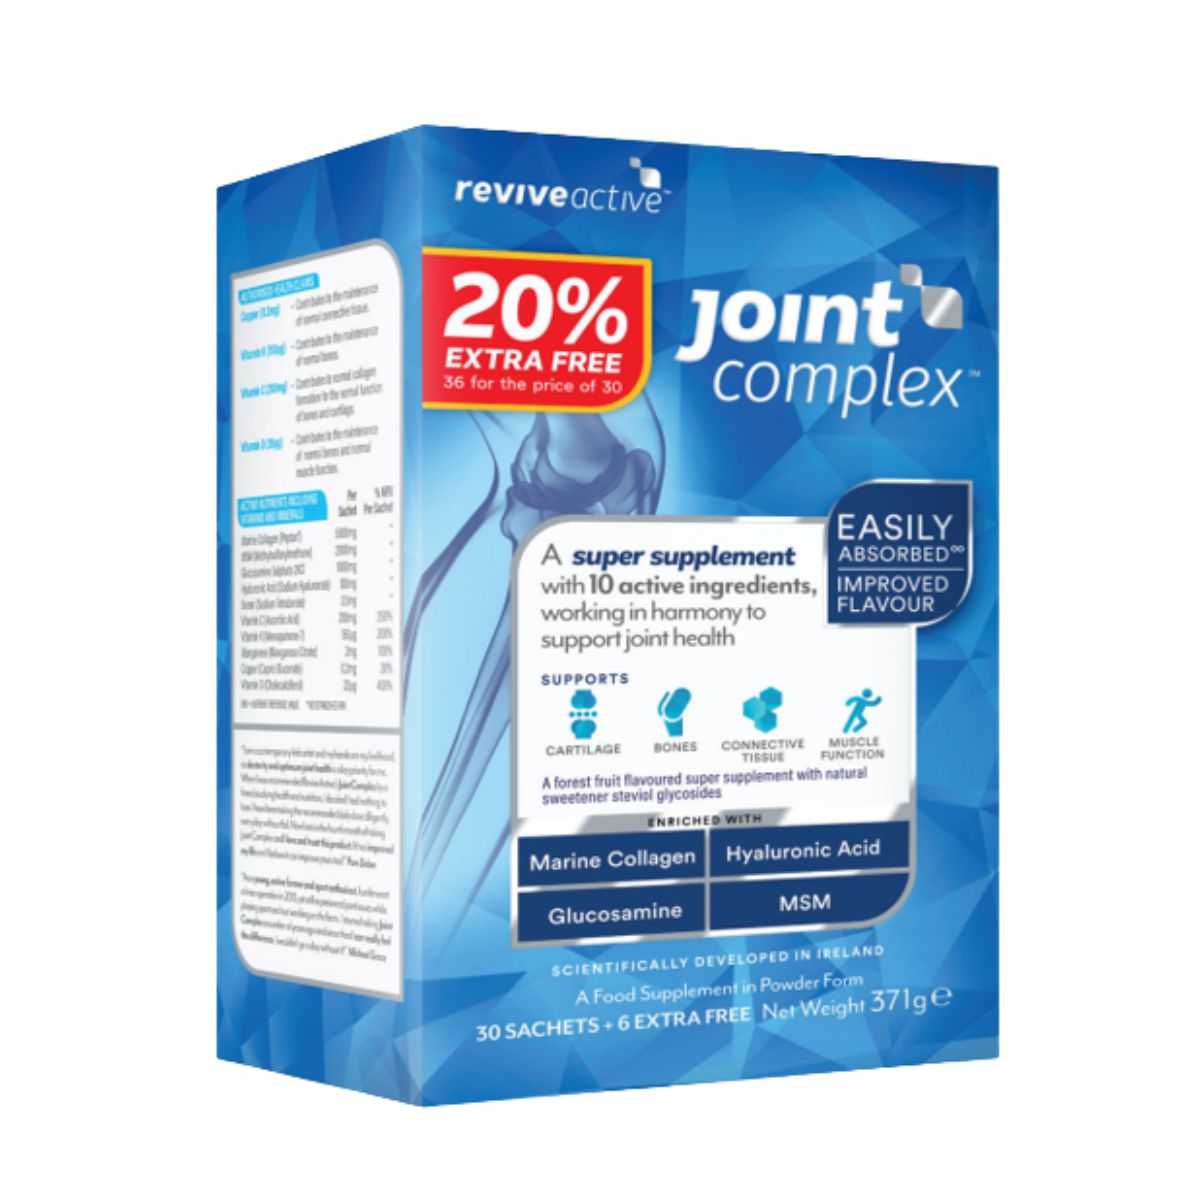 Revive Active Joint Complex 36 Sachets 20% EXTRA FREE